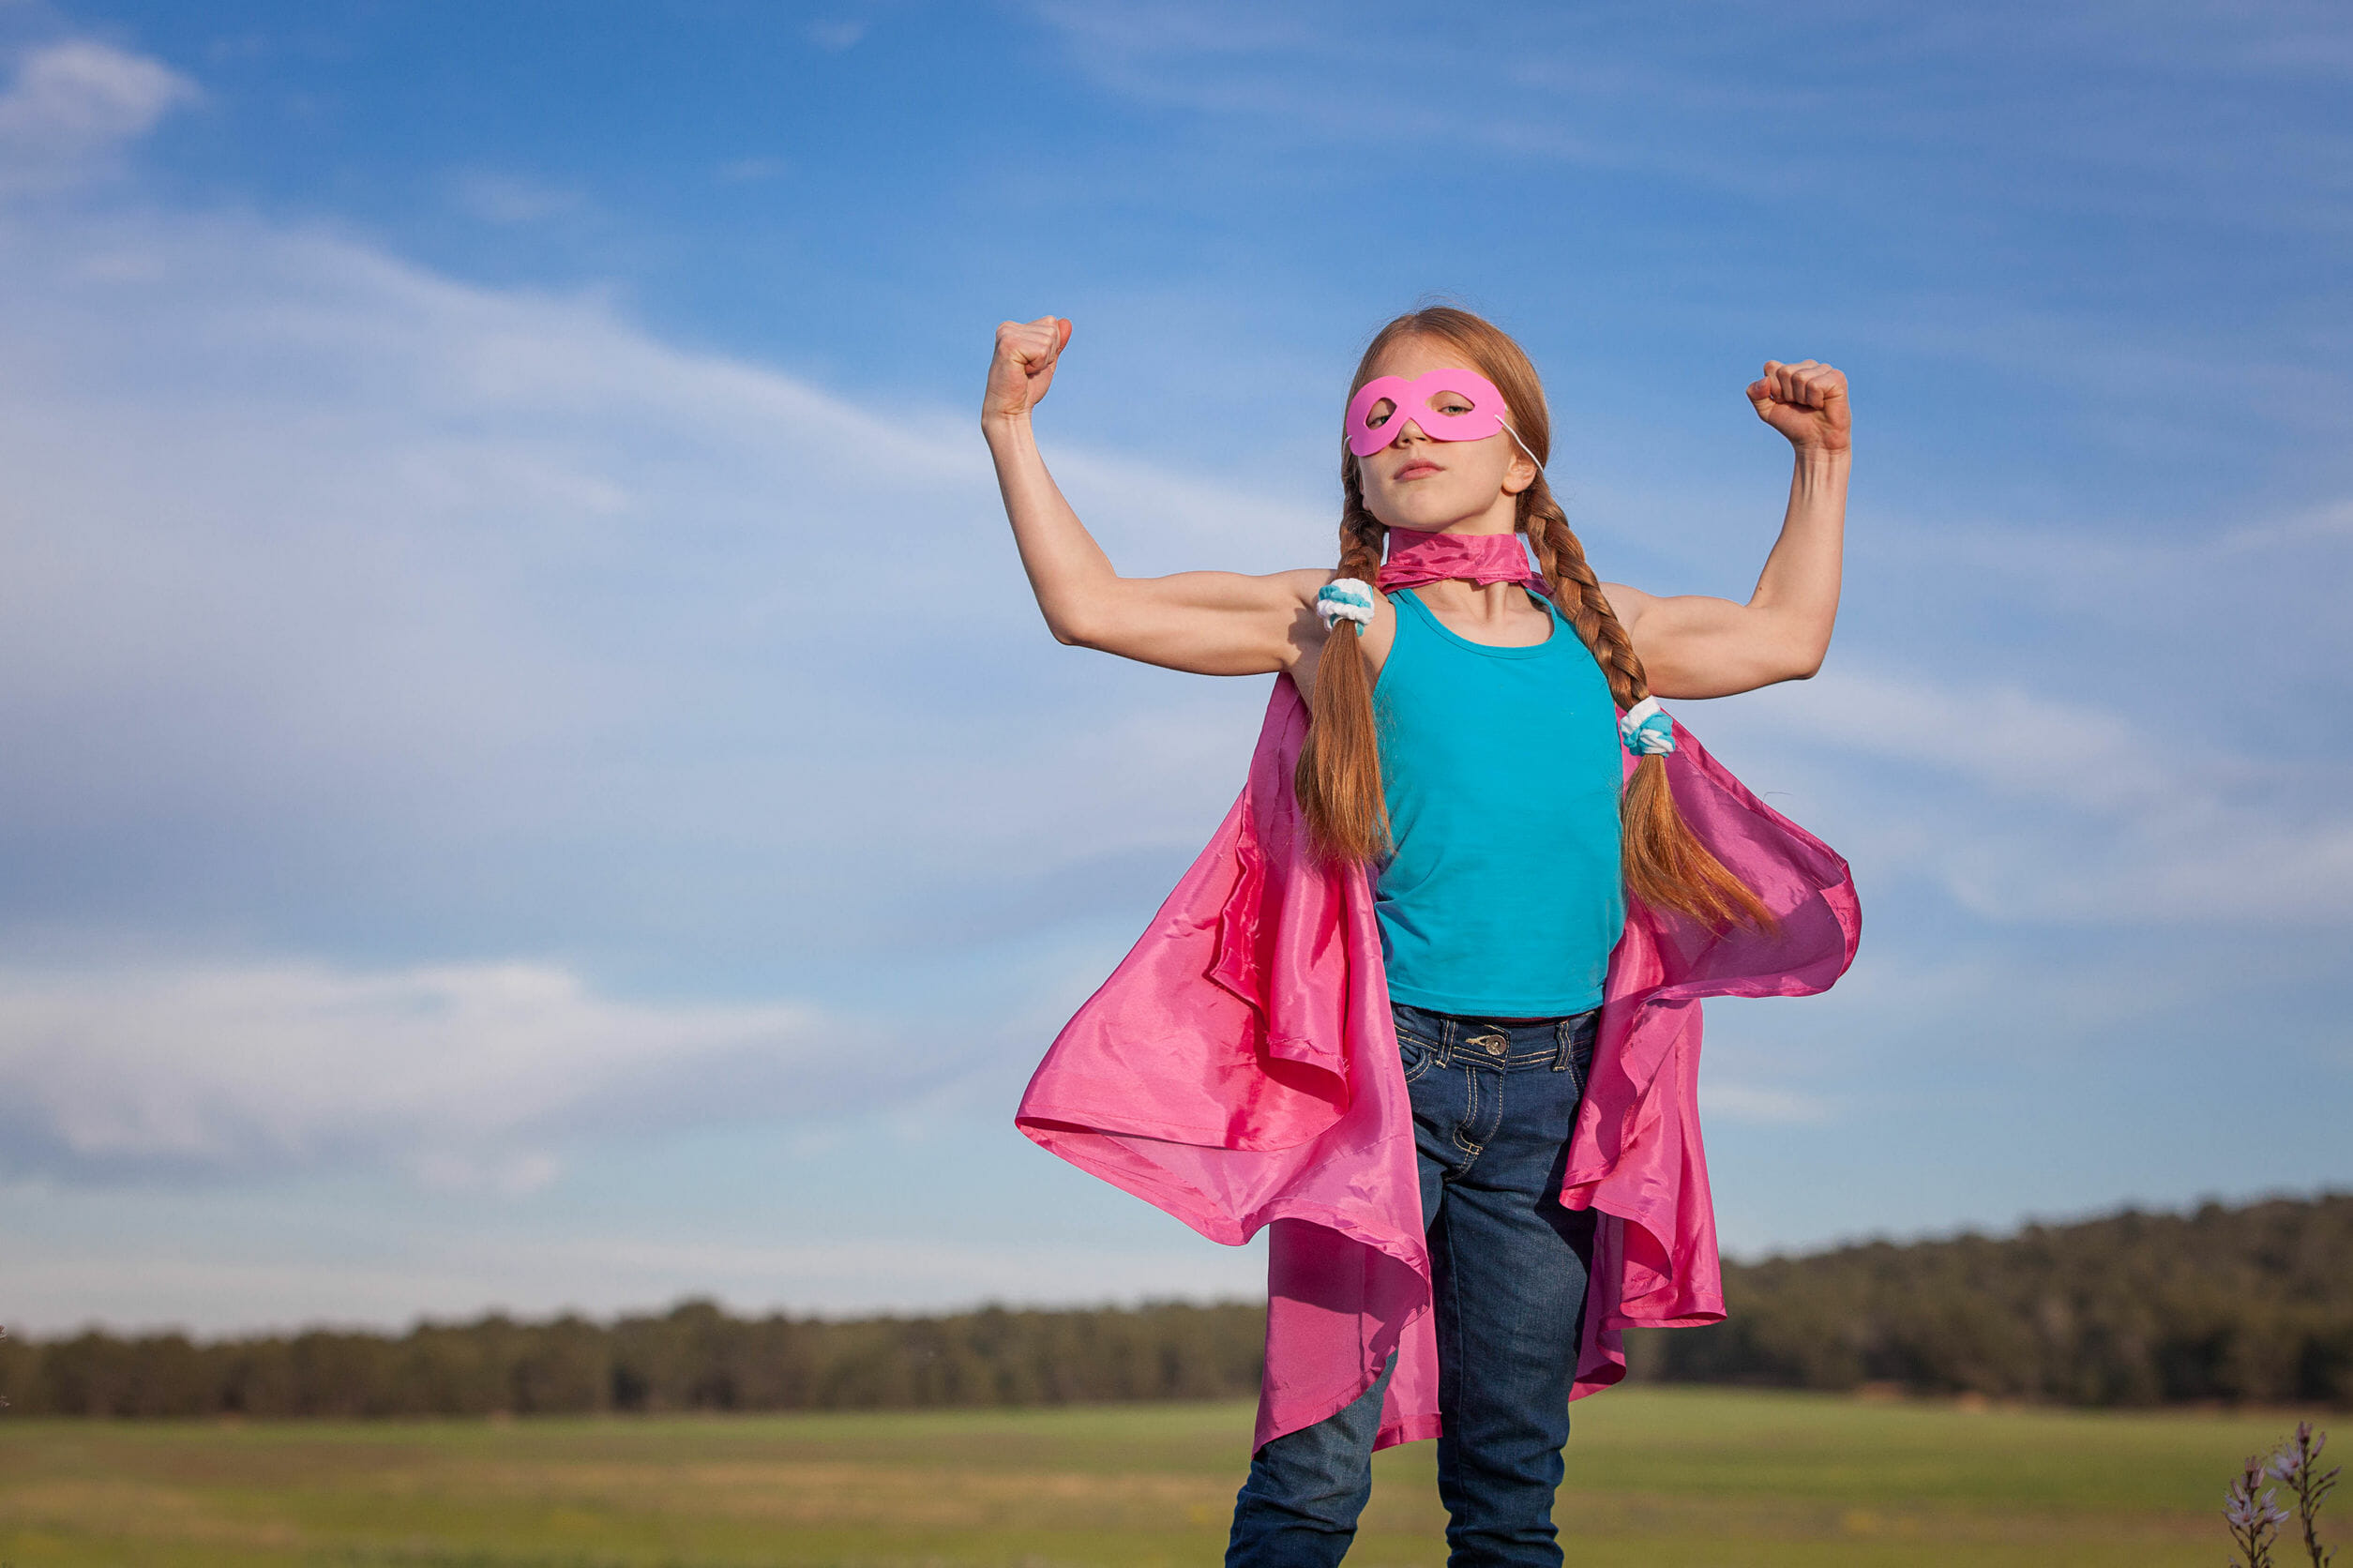 9 Secrets of Moms Who Raise Girls With Confidence Helping and teaching a girl to become confident doesn’t happen overnight, especially if she is trying to overcome social anxiety! Use these 9 parenting tips to build your daughter’s self esteem and confidence today! Empower her with these positive parenting strategies from the experts! It’s all about Girl Power, ladies! #parenting #parenting101 #selfesteem  